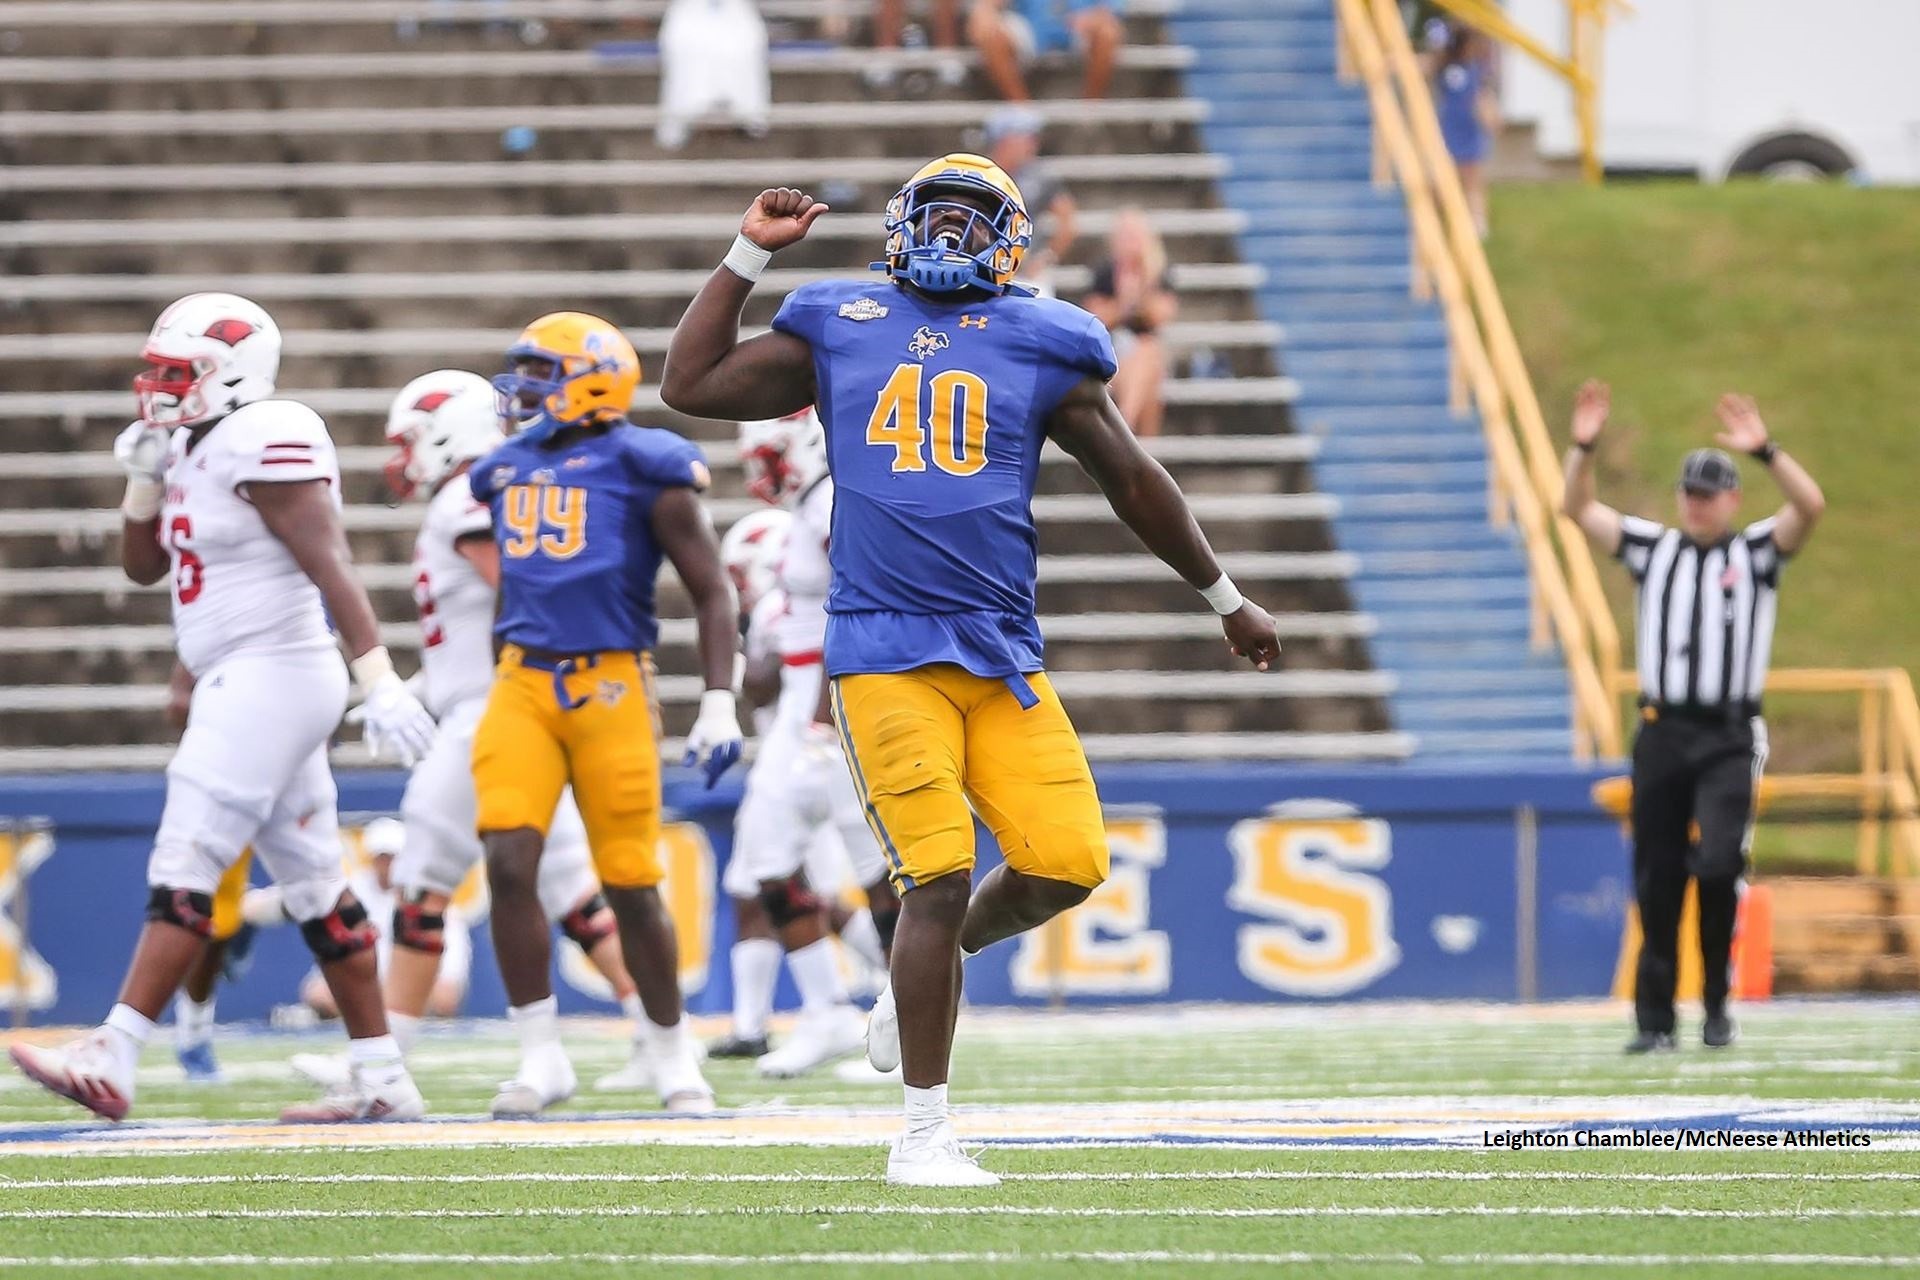 McNeese, Four Players Collect FCS Week 8 National Awards